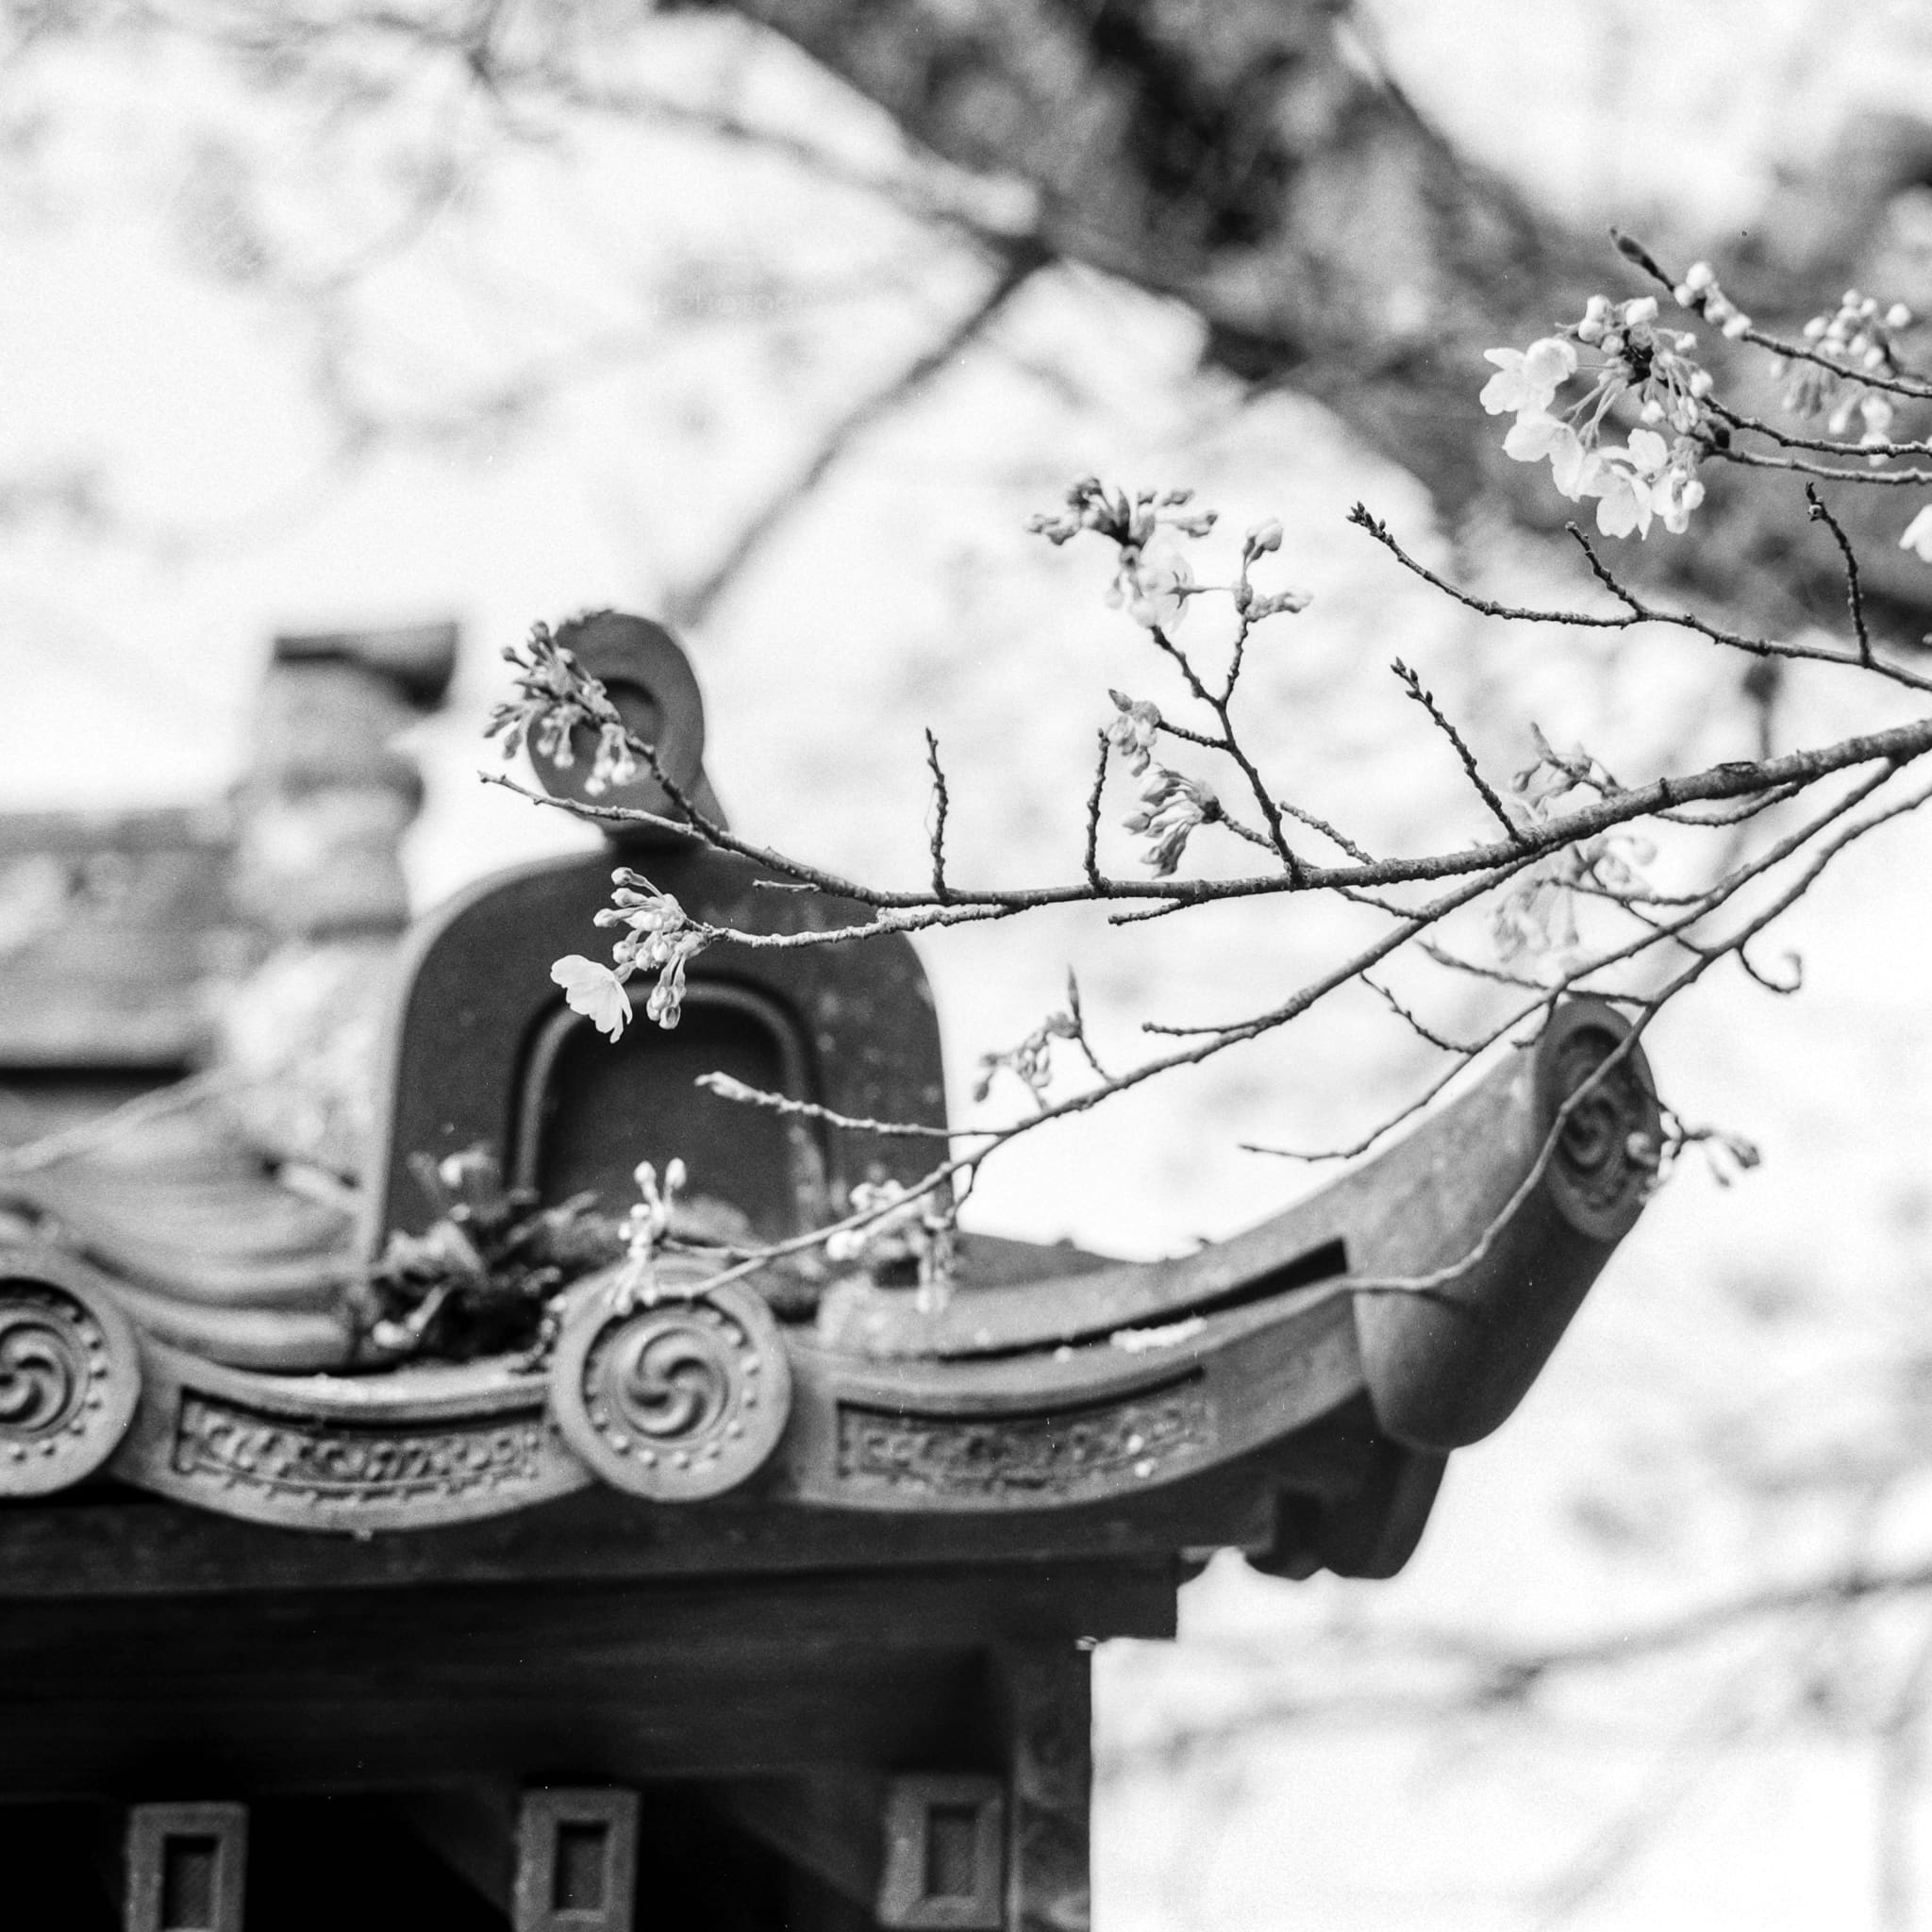 Cherry blossom branch against traditional East Asian roof in a monochrome photograph.